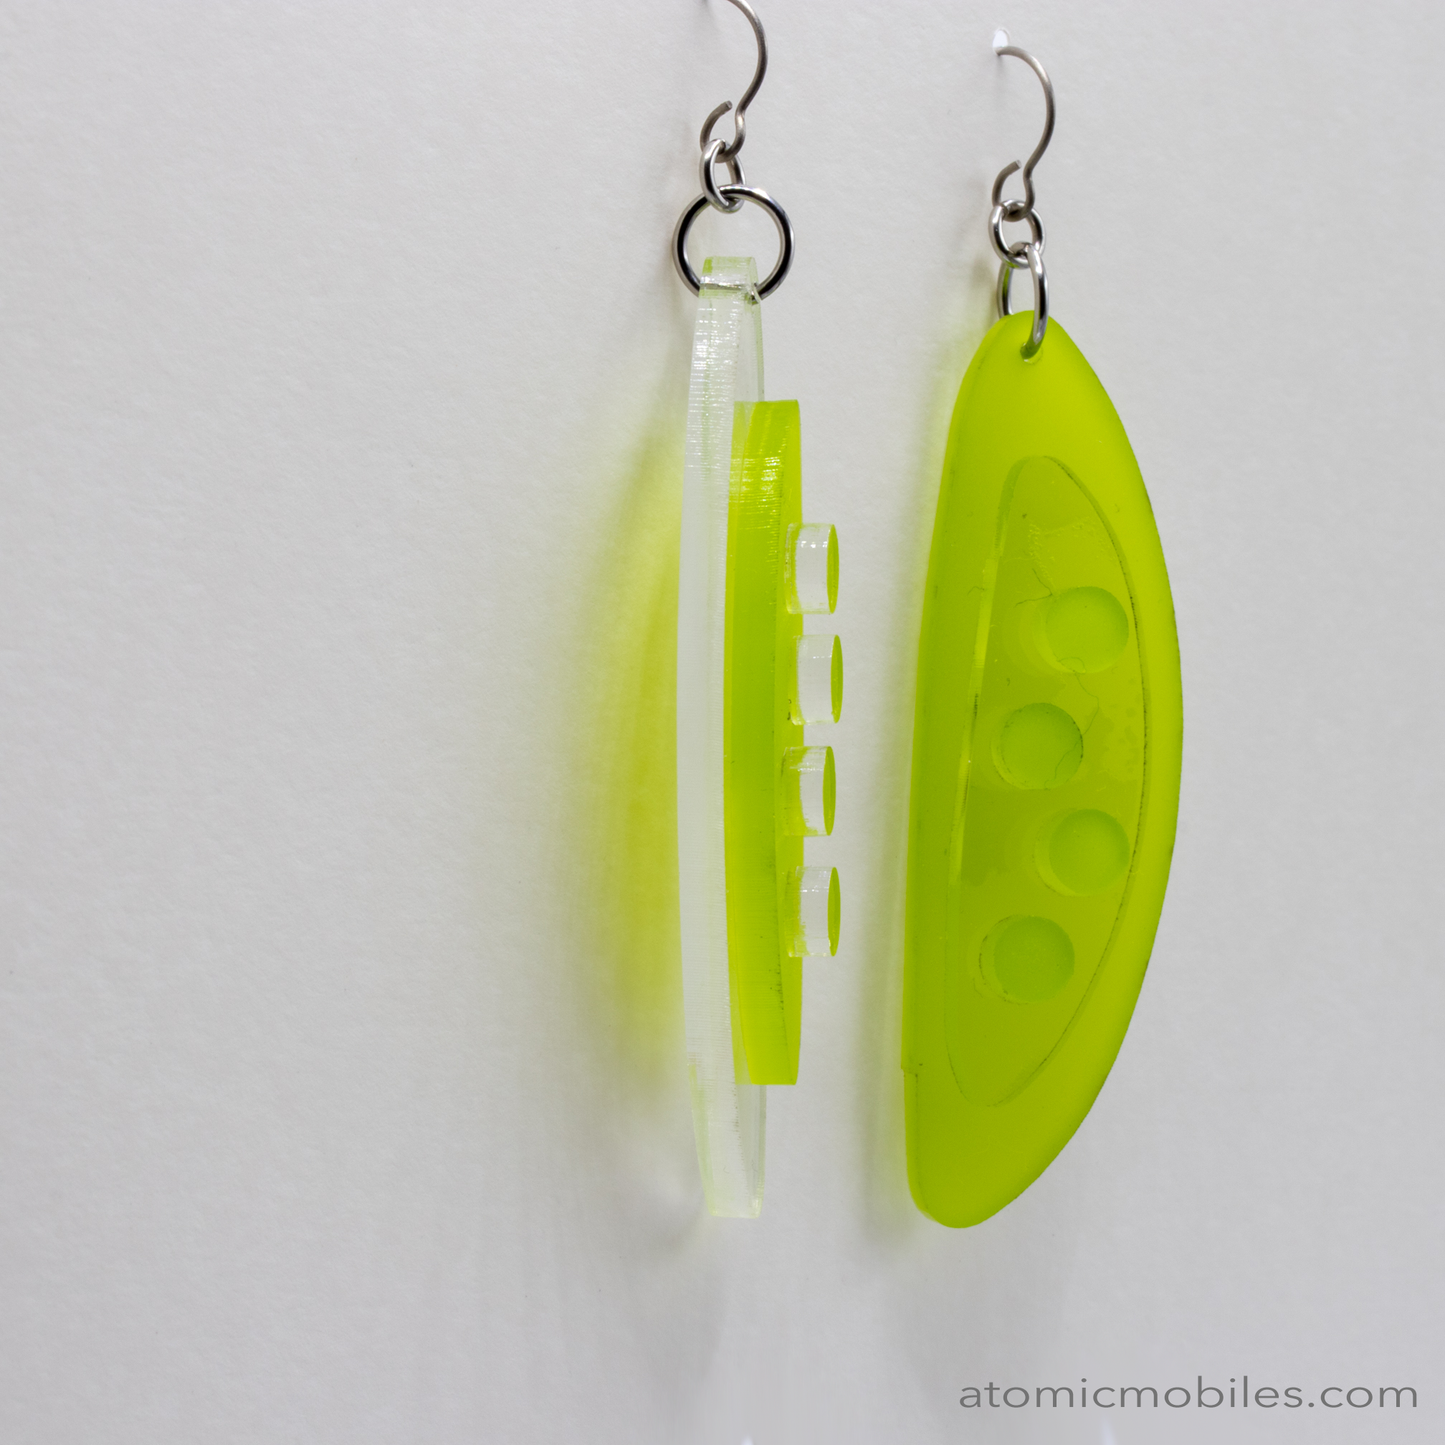 POPdots modern retro statement earrings in Frosty Lime Green and Clear acrylic by AtomicMobiles.com